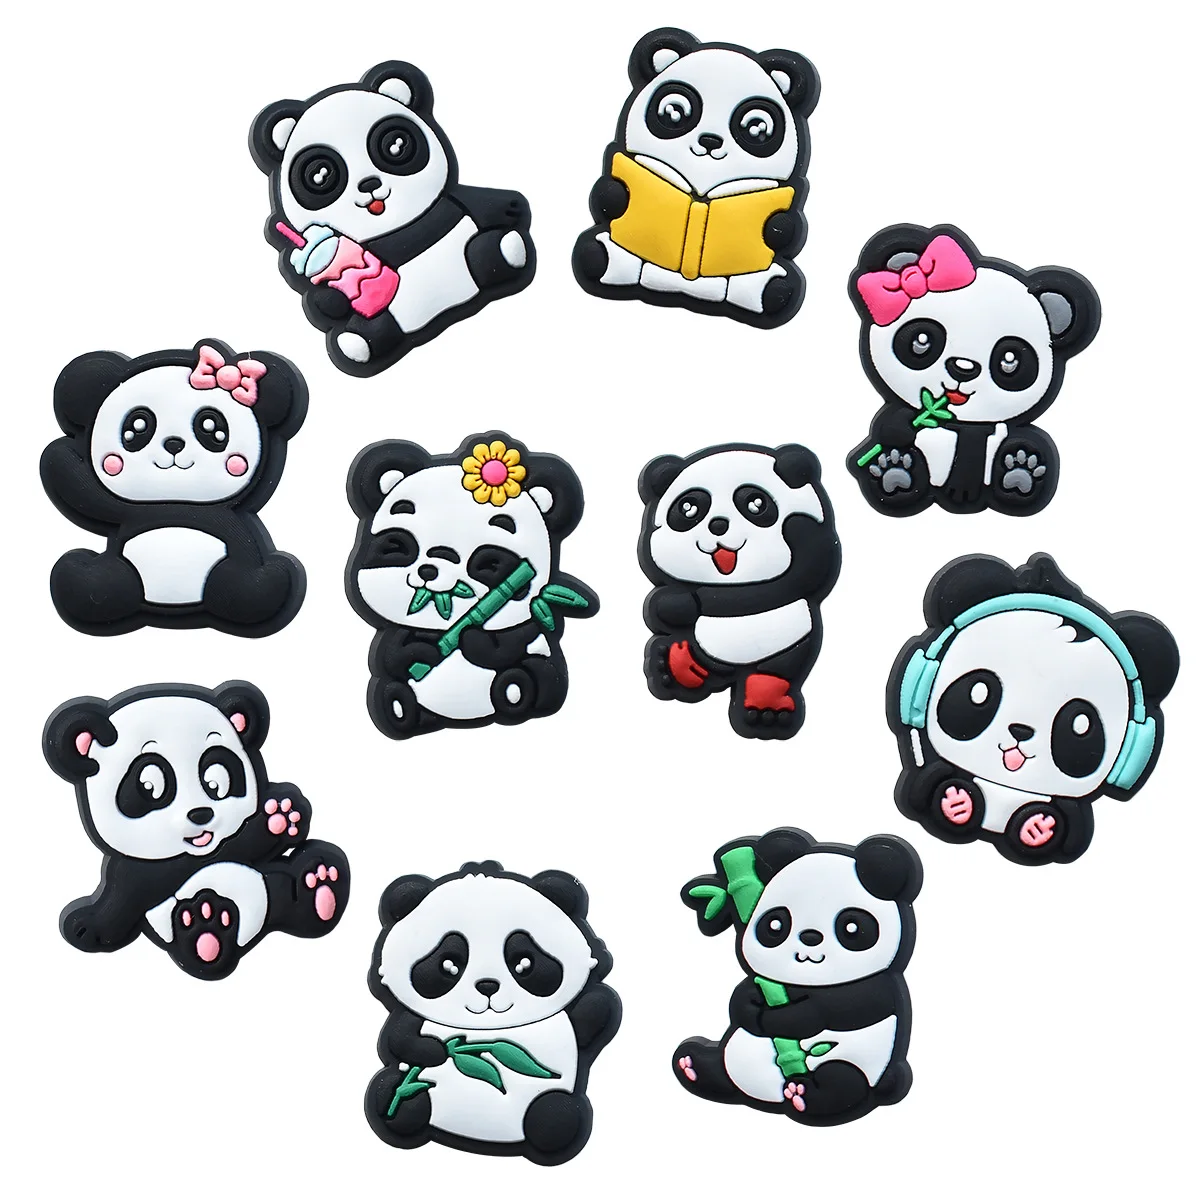 

New Arrive Hot Sale Cute Panda Animals Shoe Charms Decorations for Croc Accessories Pin Kids Adults Woman Party Favor Gifts